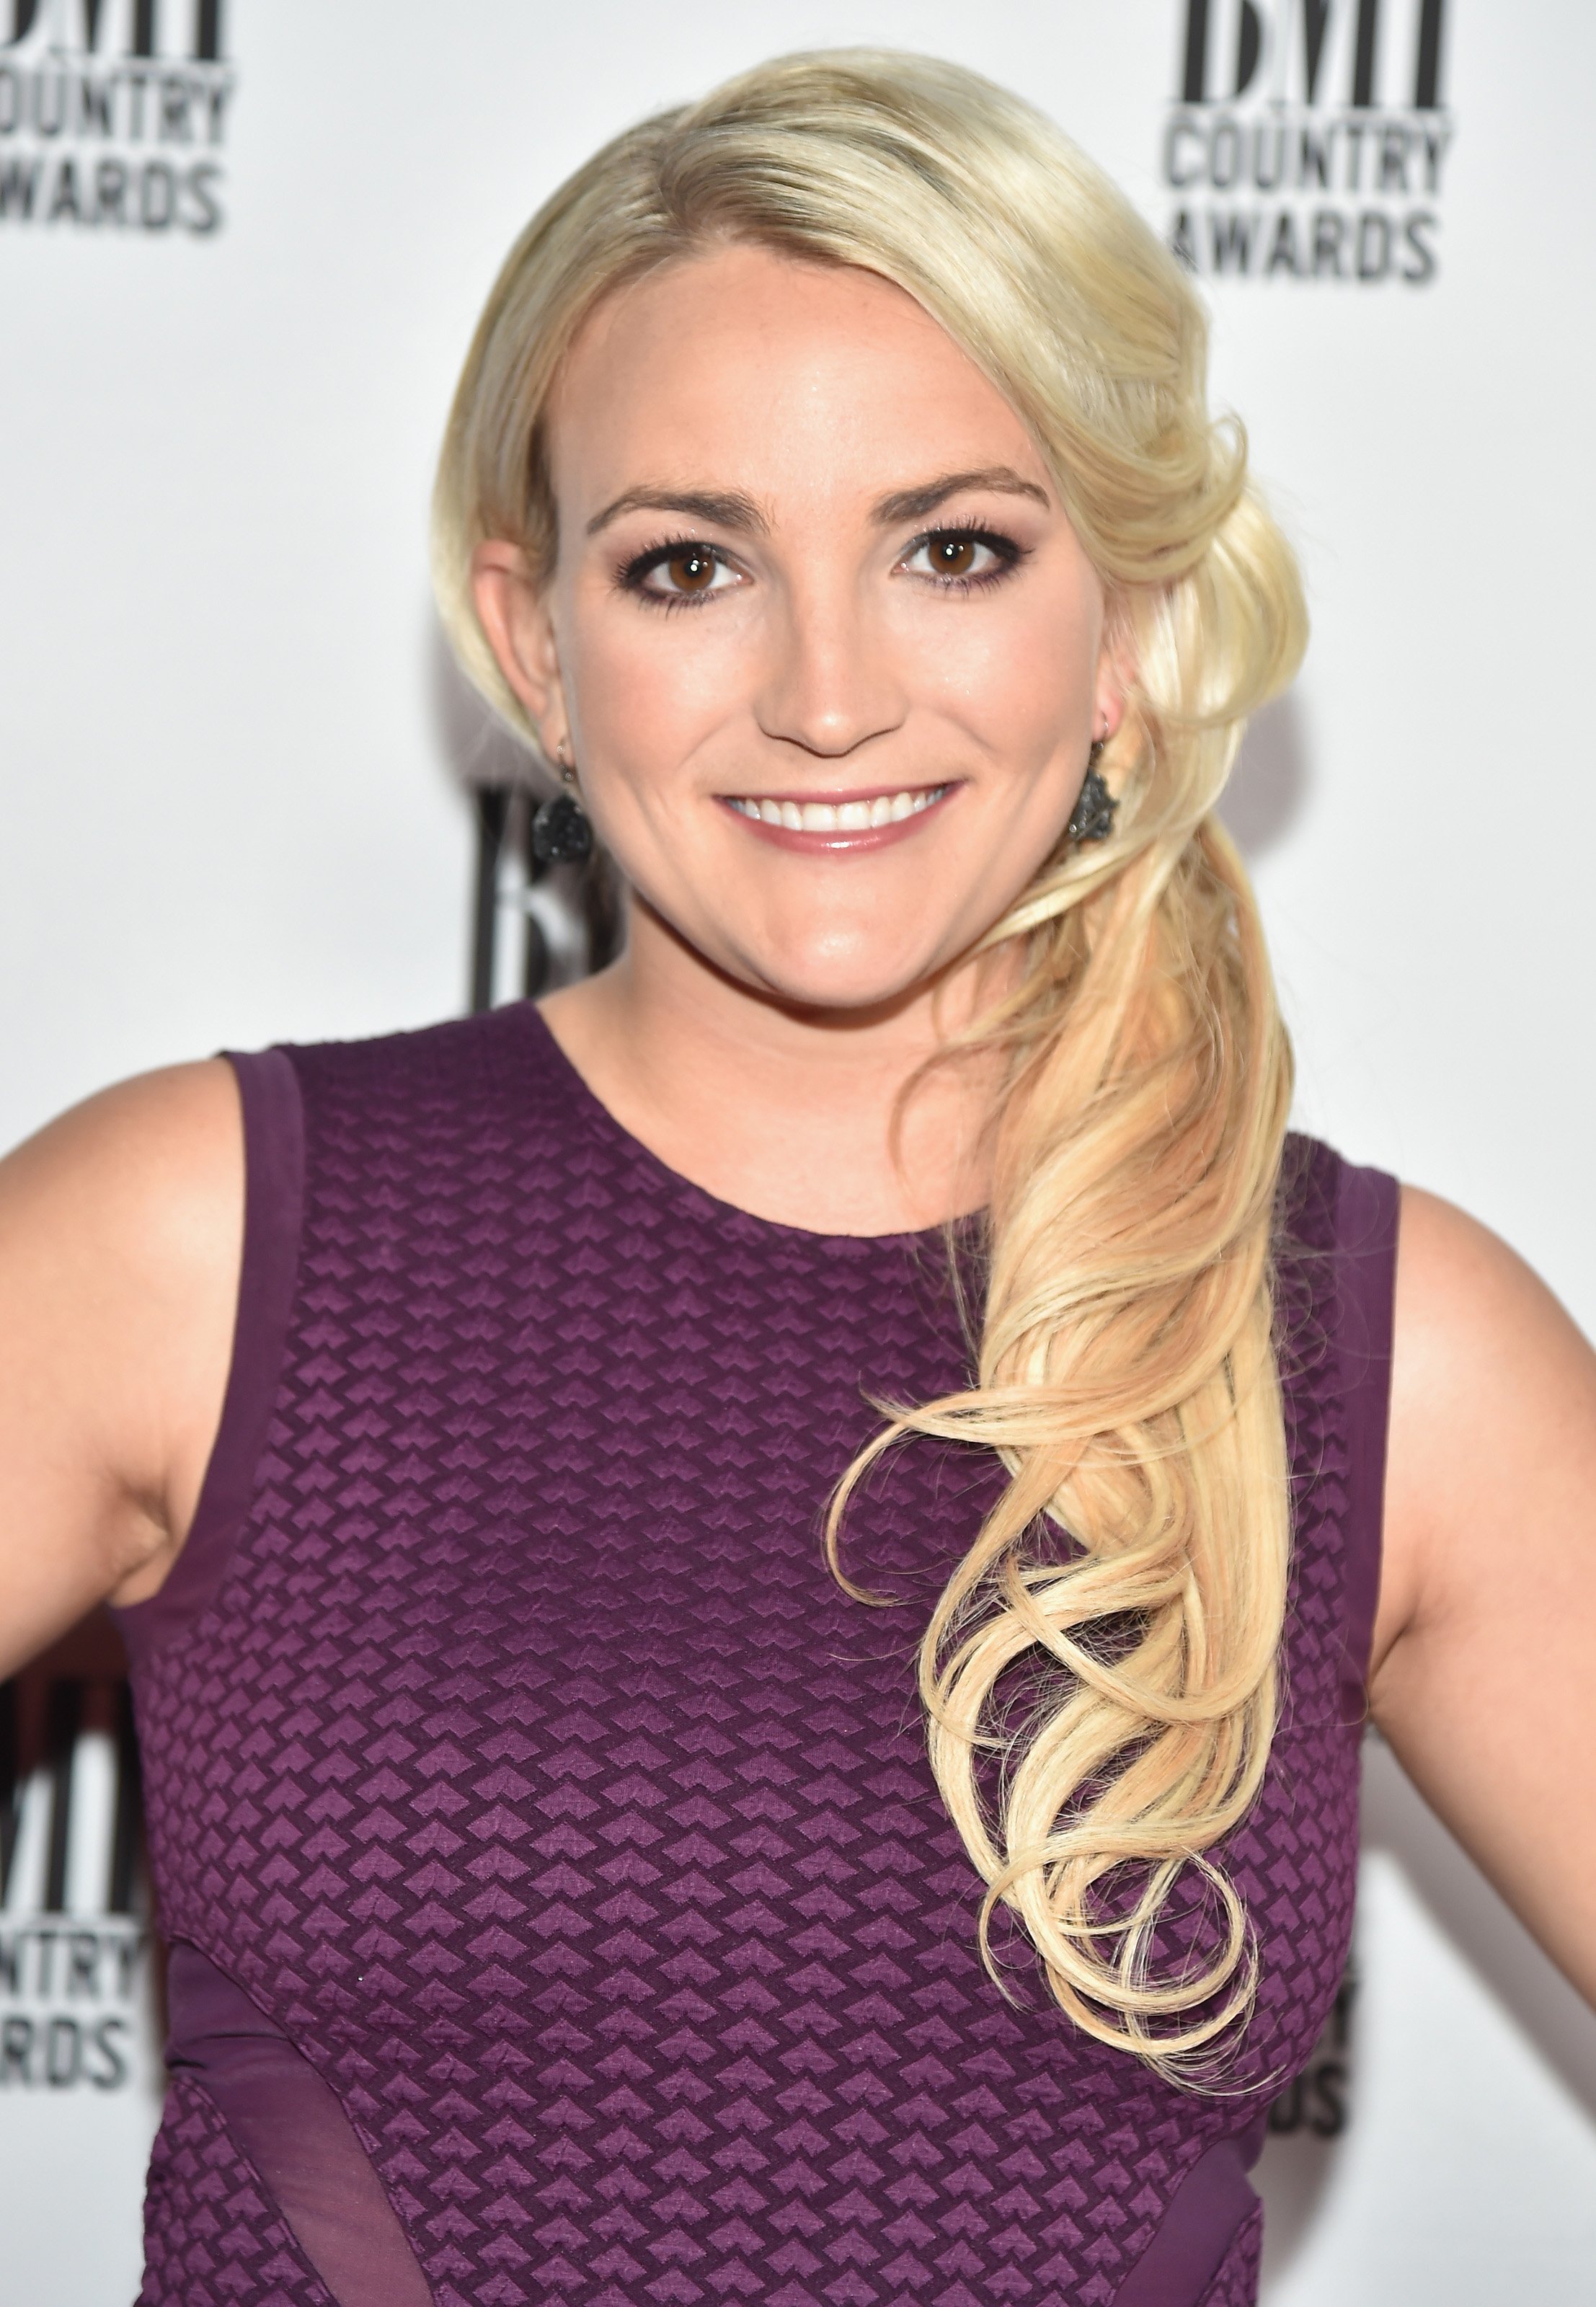 Singer-songwriter Jamie Lynn Spears attends the 64th Annual BMI Country awards on November 1, 2016 in Nashville, Tennessee | Photo: Getty Images